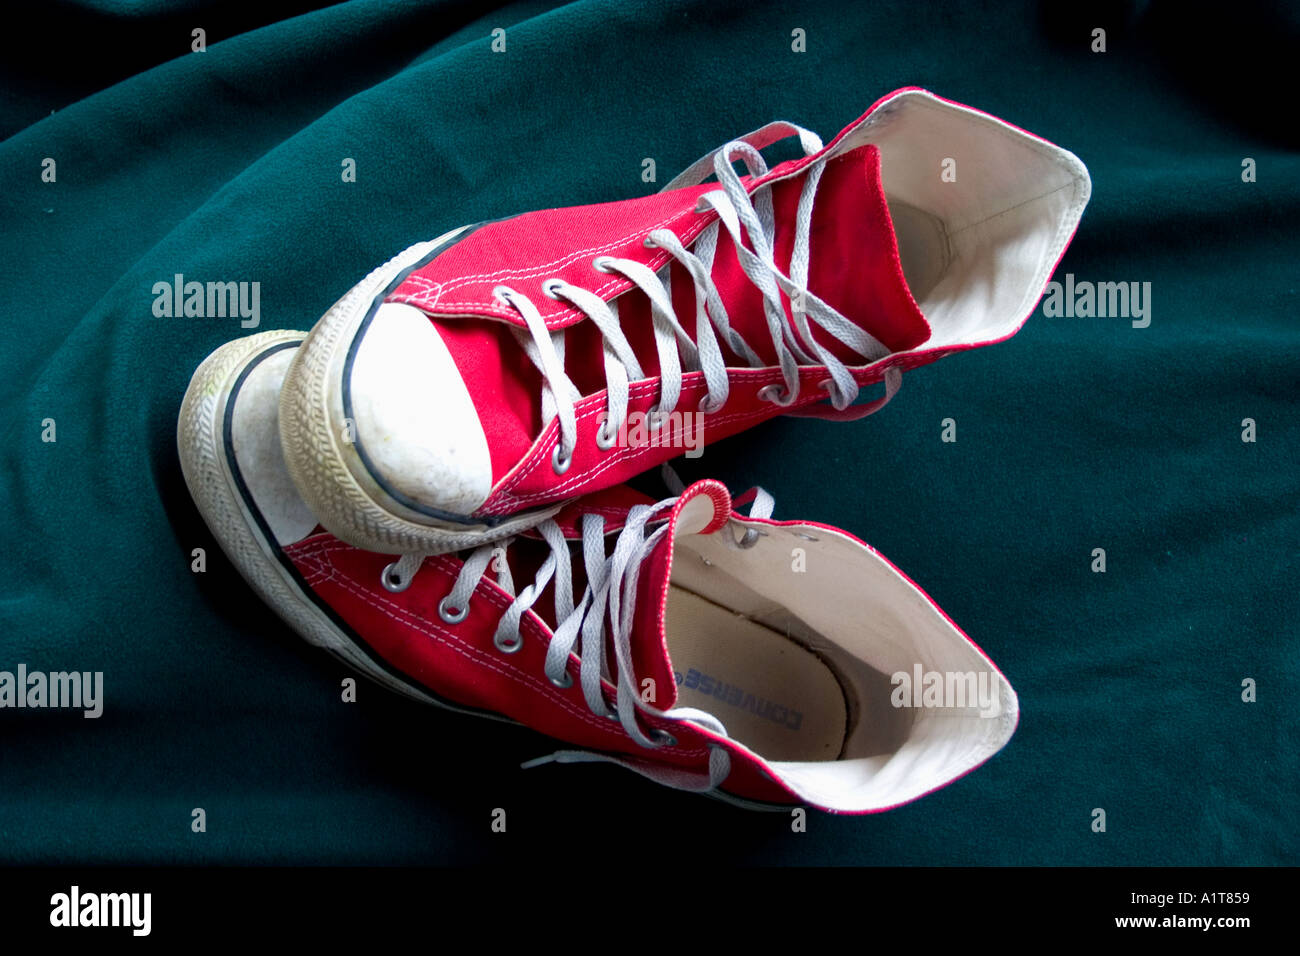 red converse chuck taylor high tops